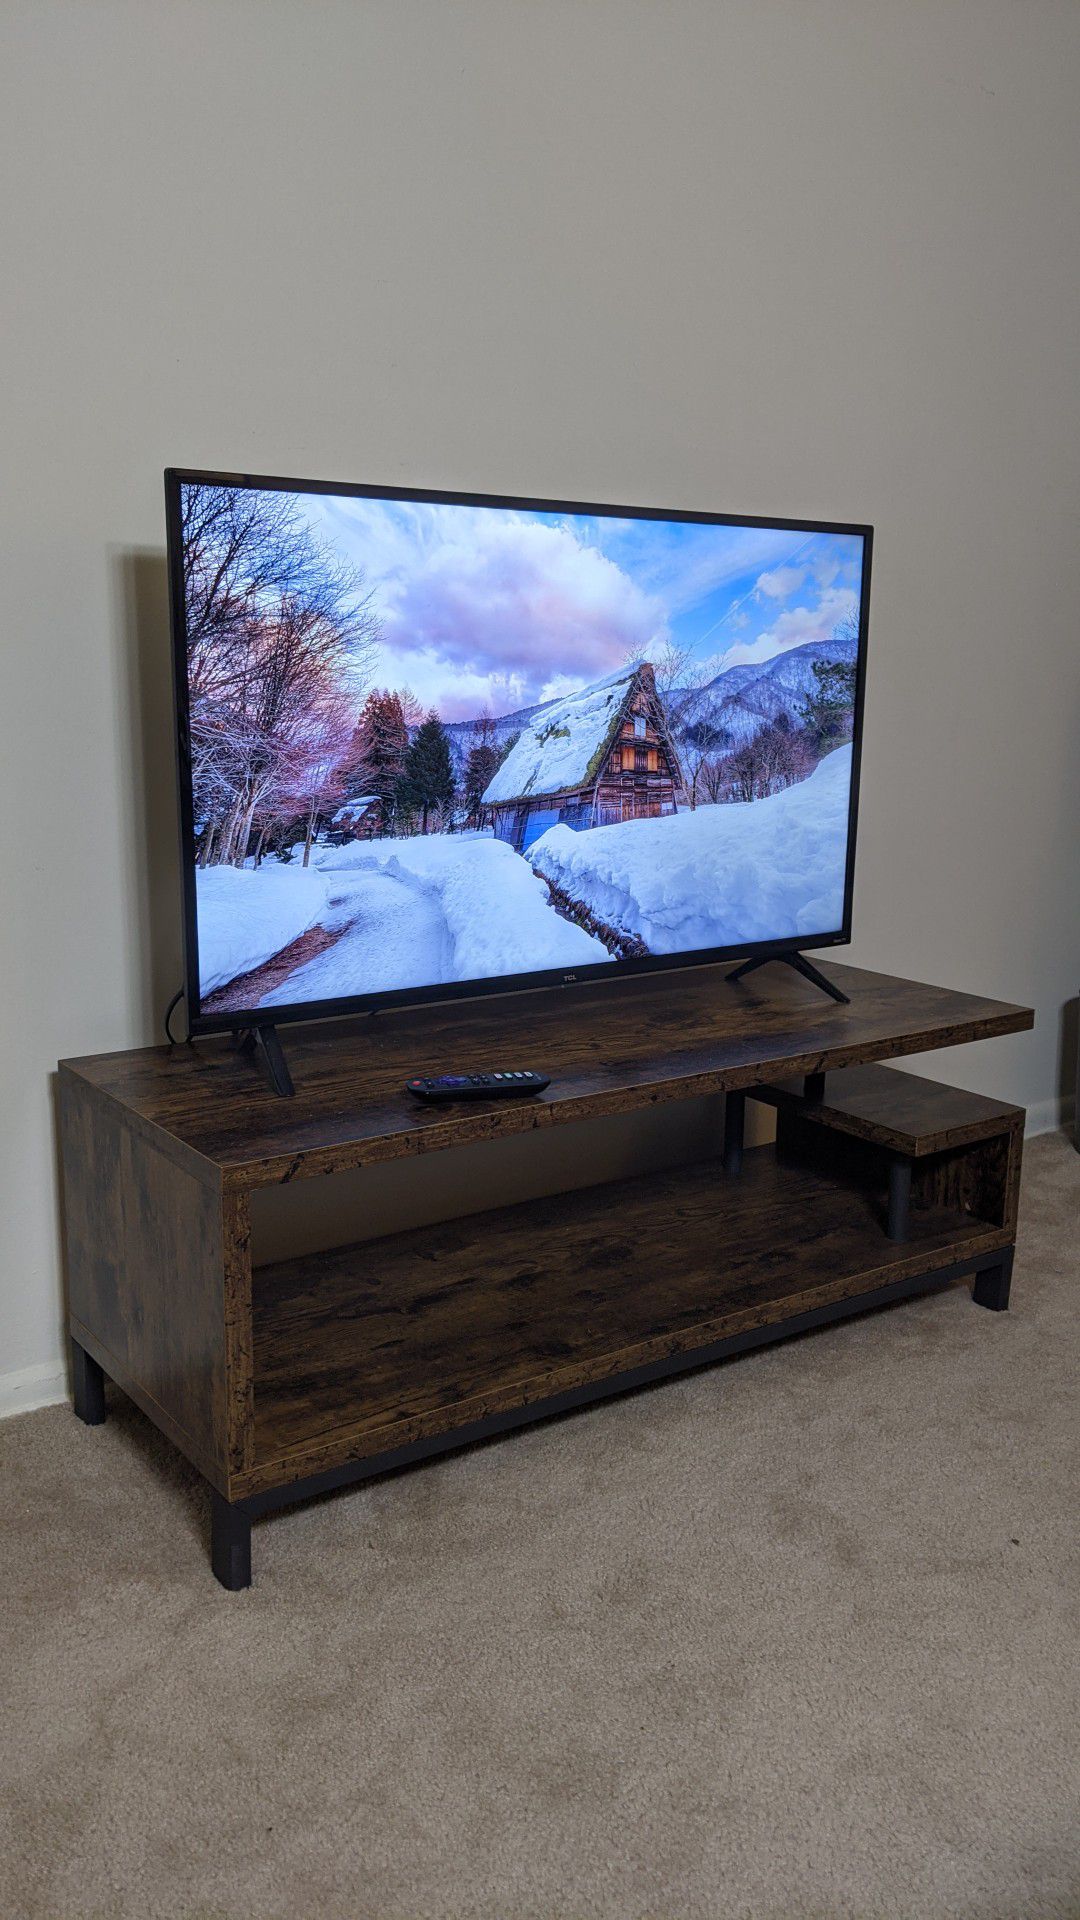 TCL 40" Smart TV + TV Stand